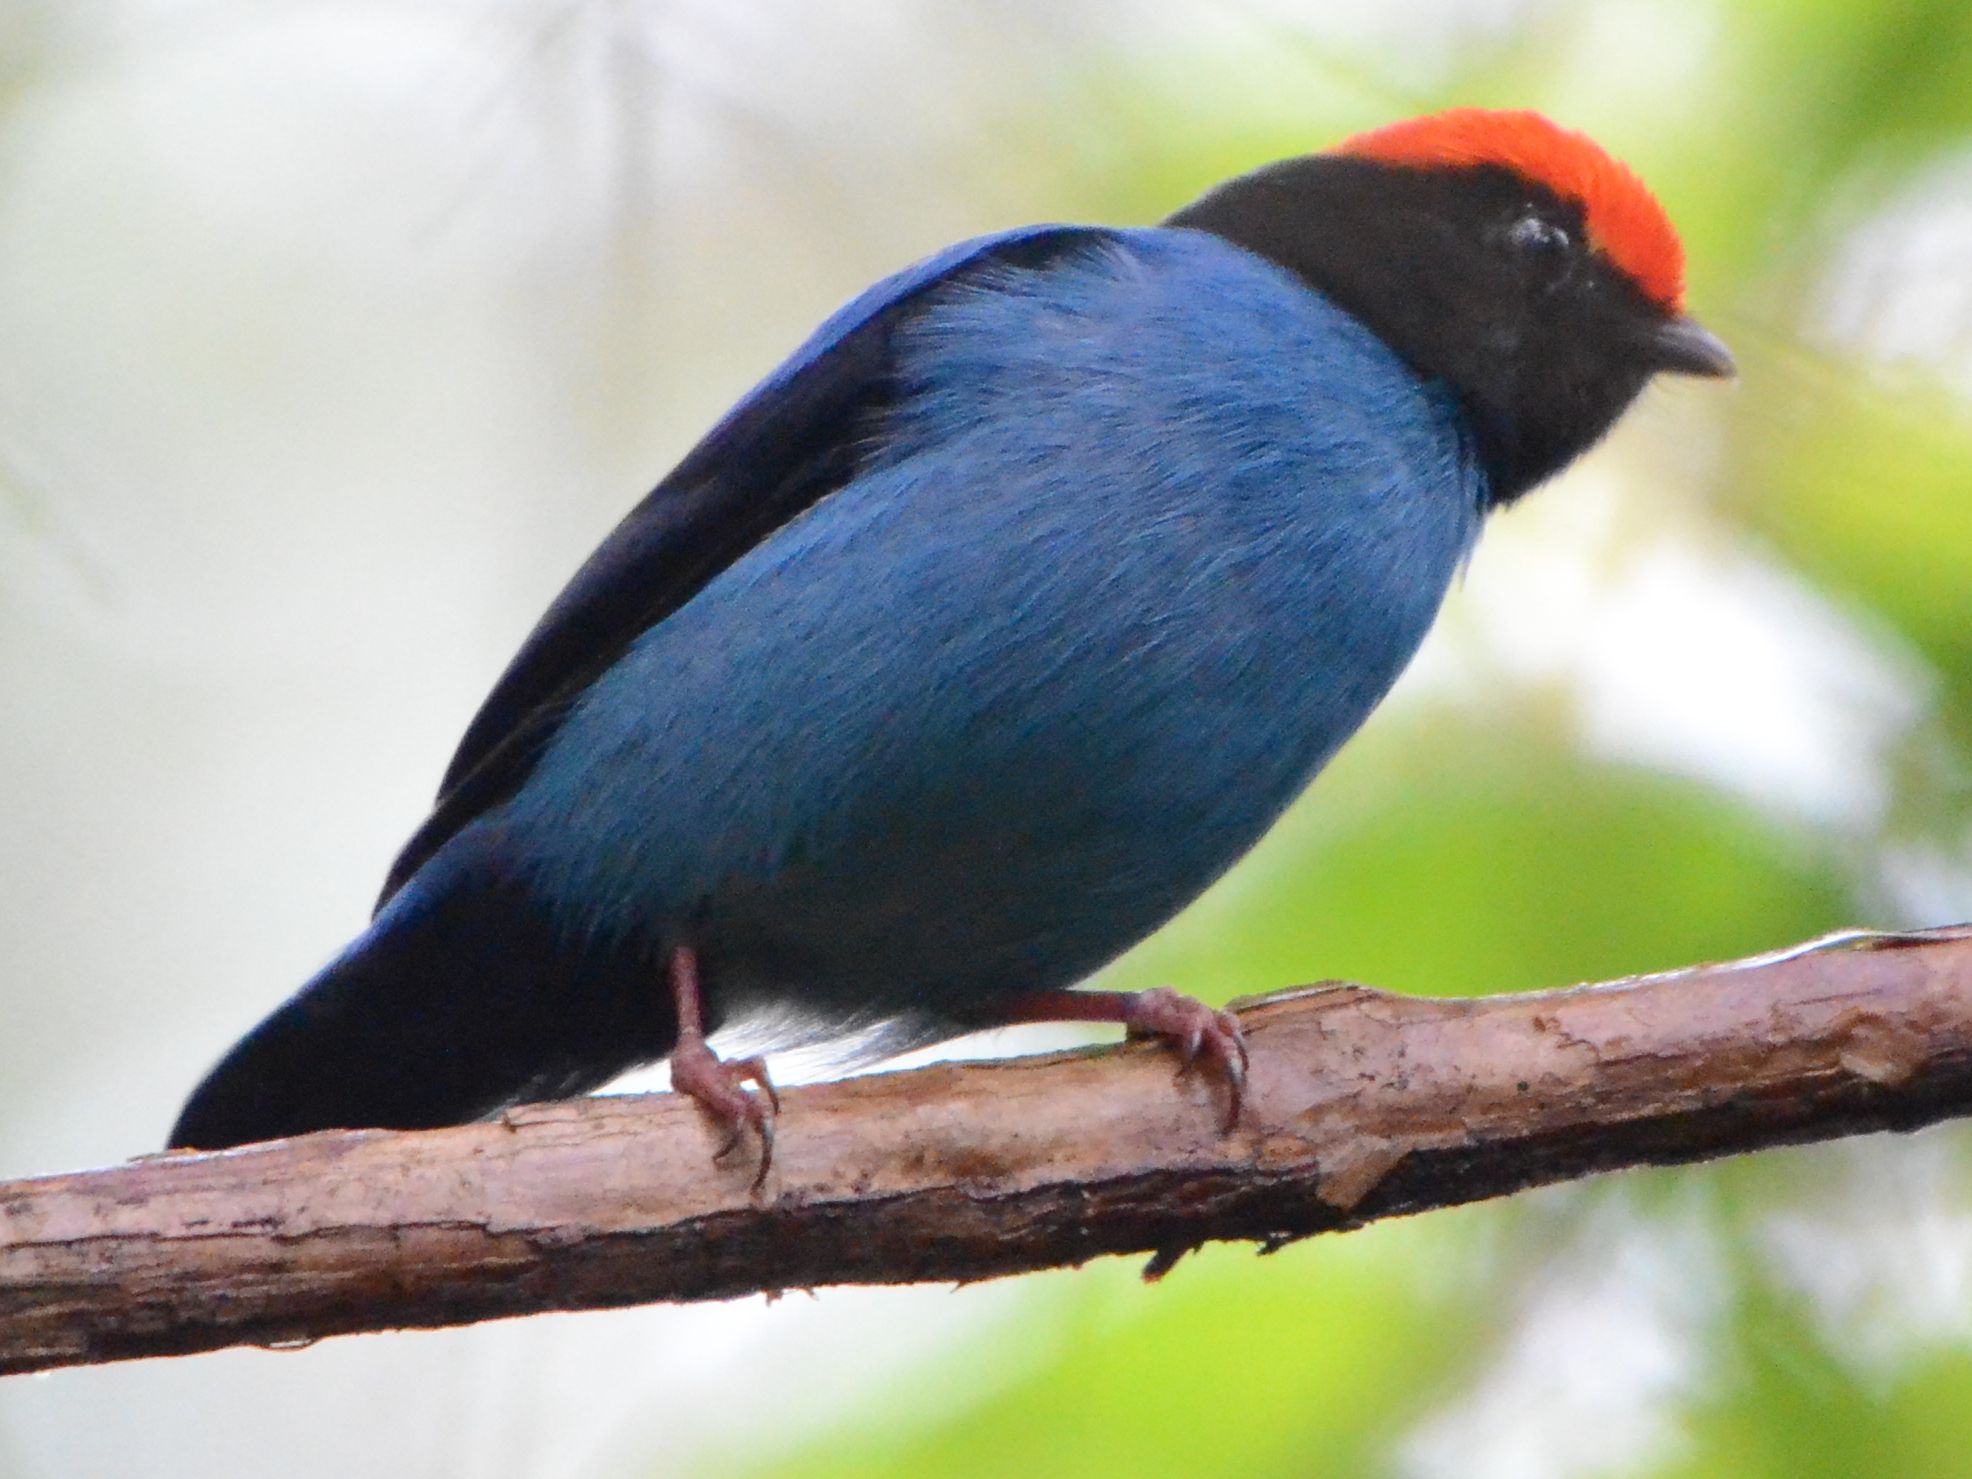 Click picture to see more Blue (Swallow-tailed) Manakins.